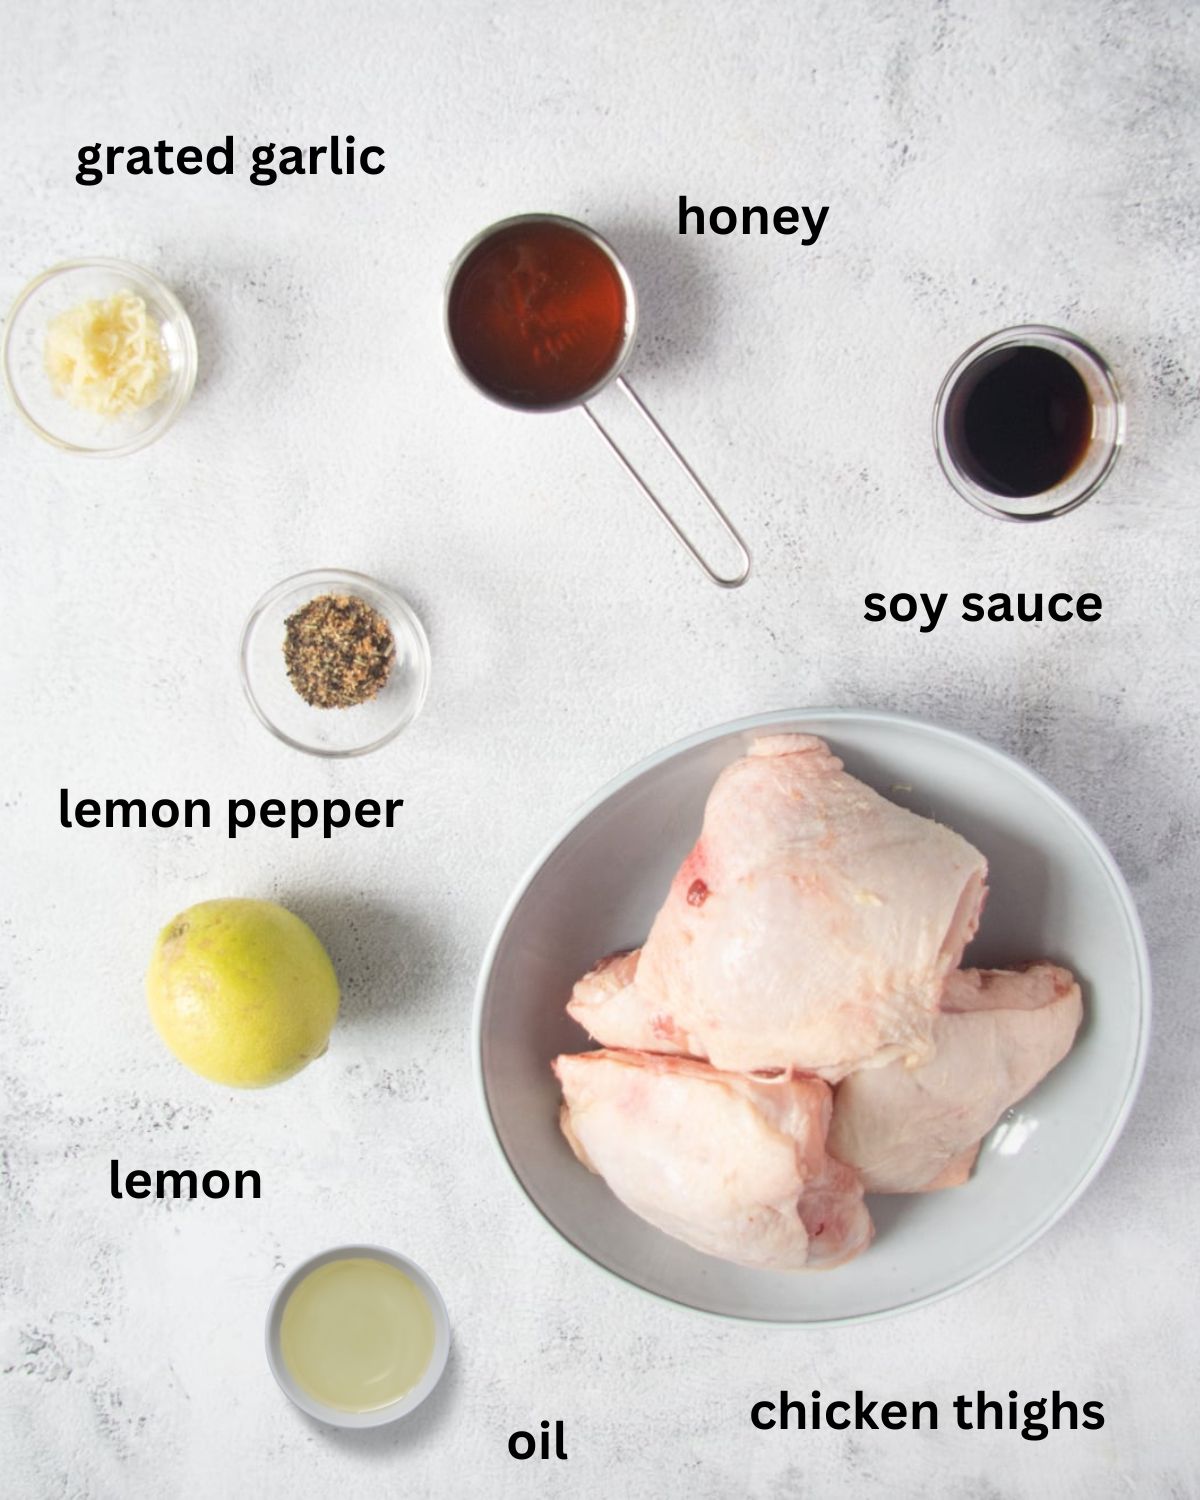 listed ingredients for cooking chicken with lemon pepper and honey sauce.